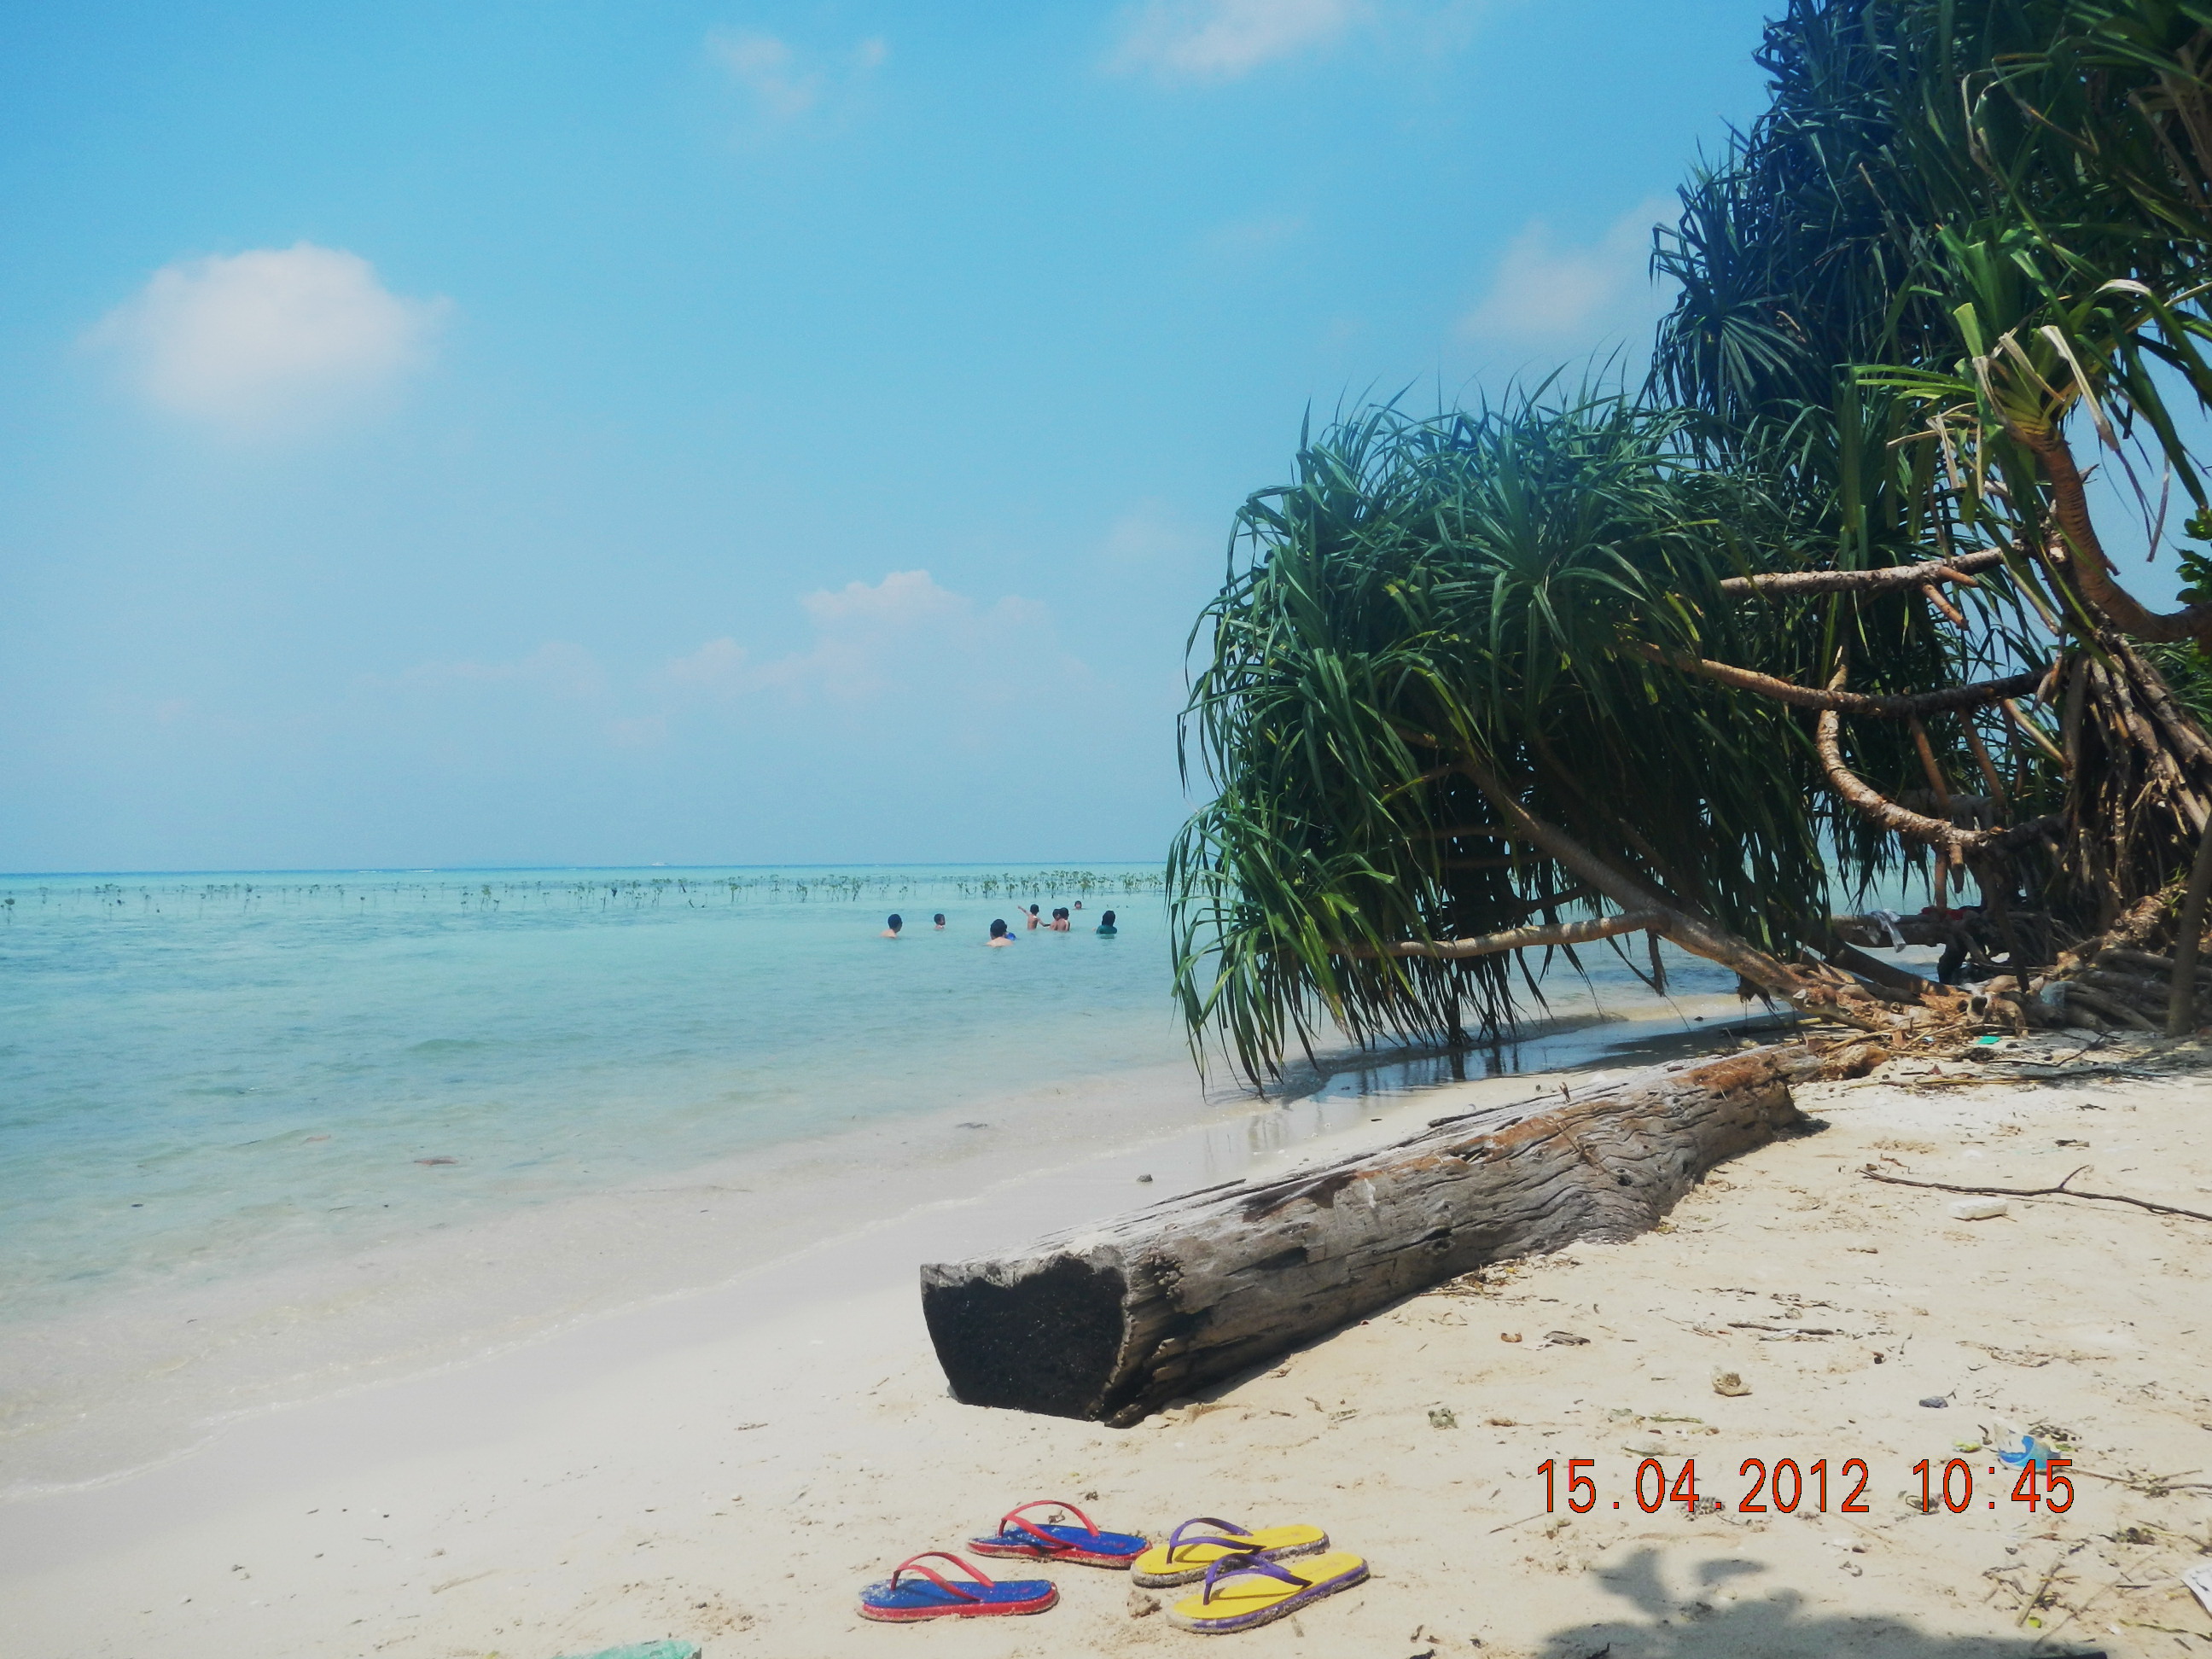 Download this Pulau Sangiang picture